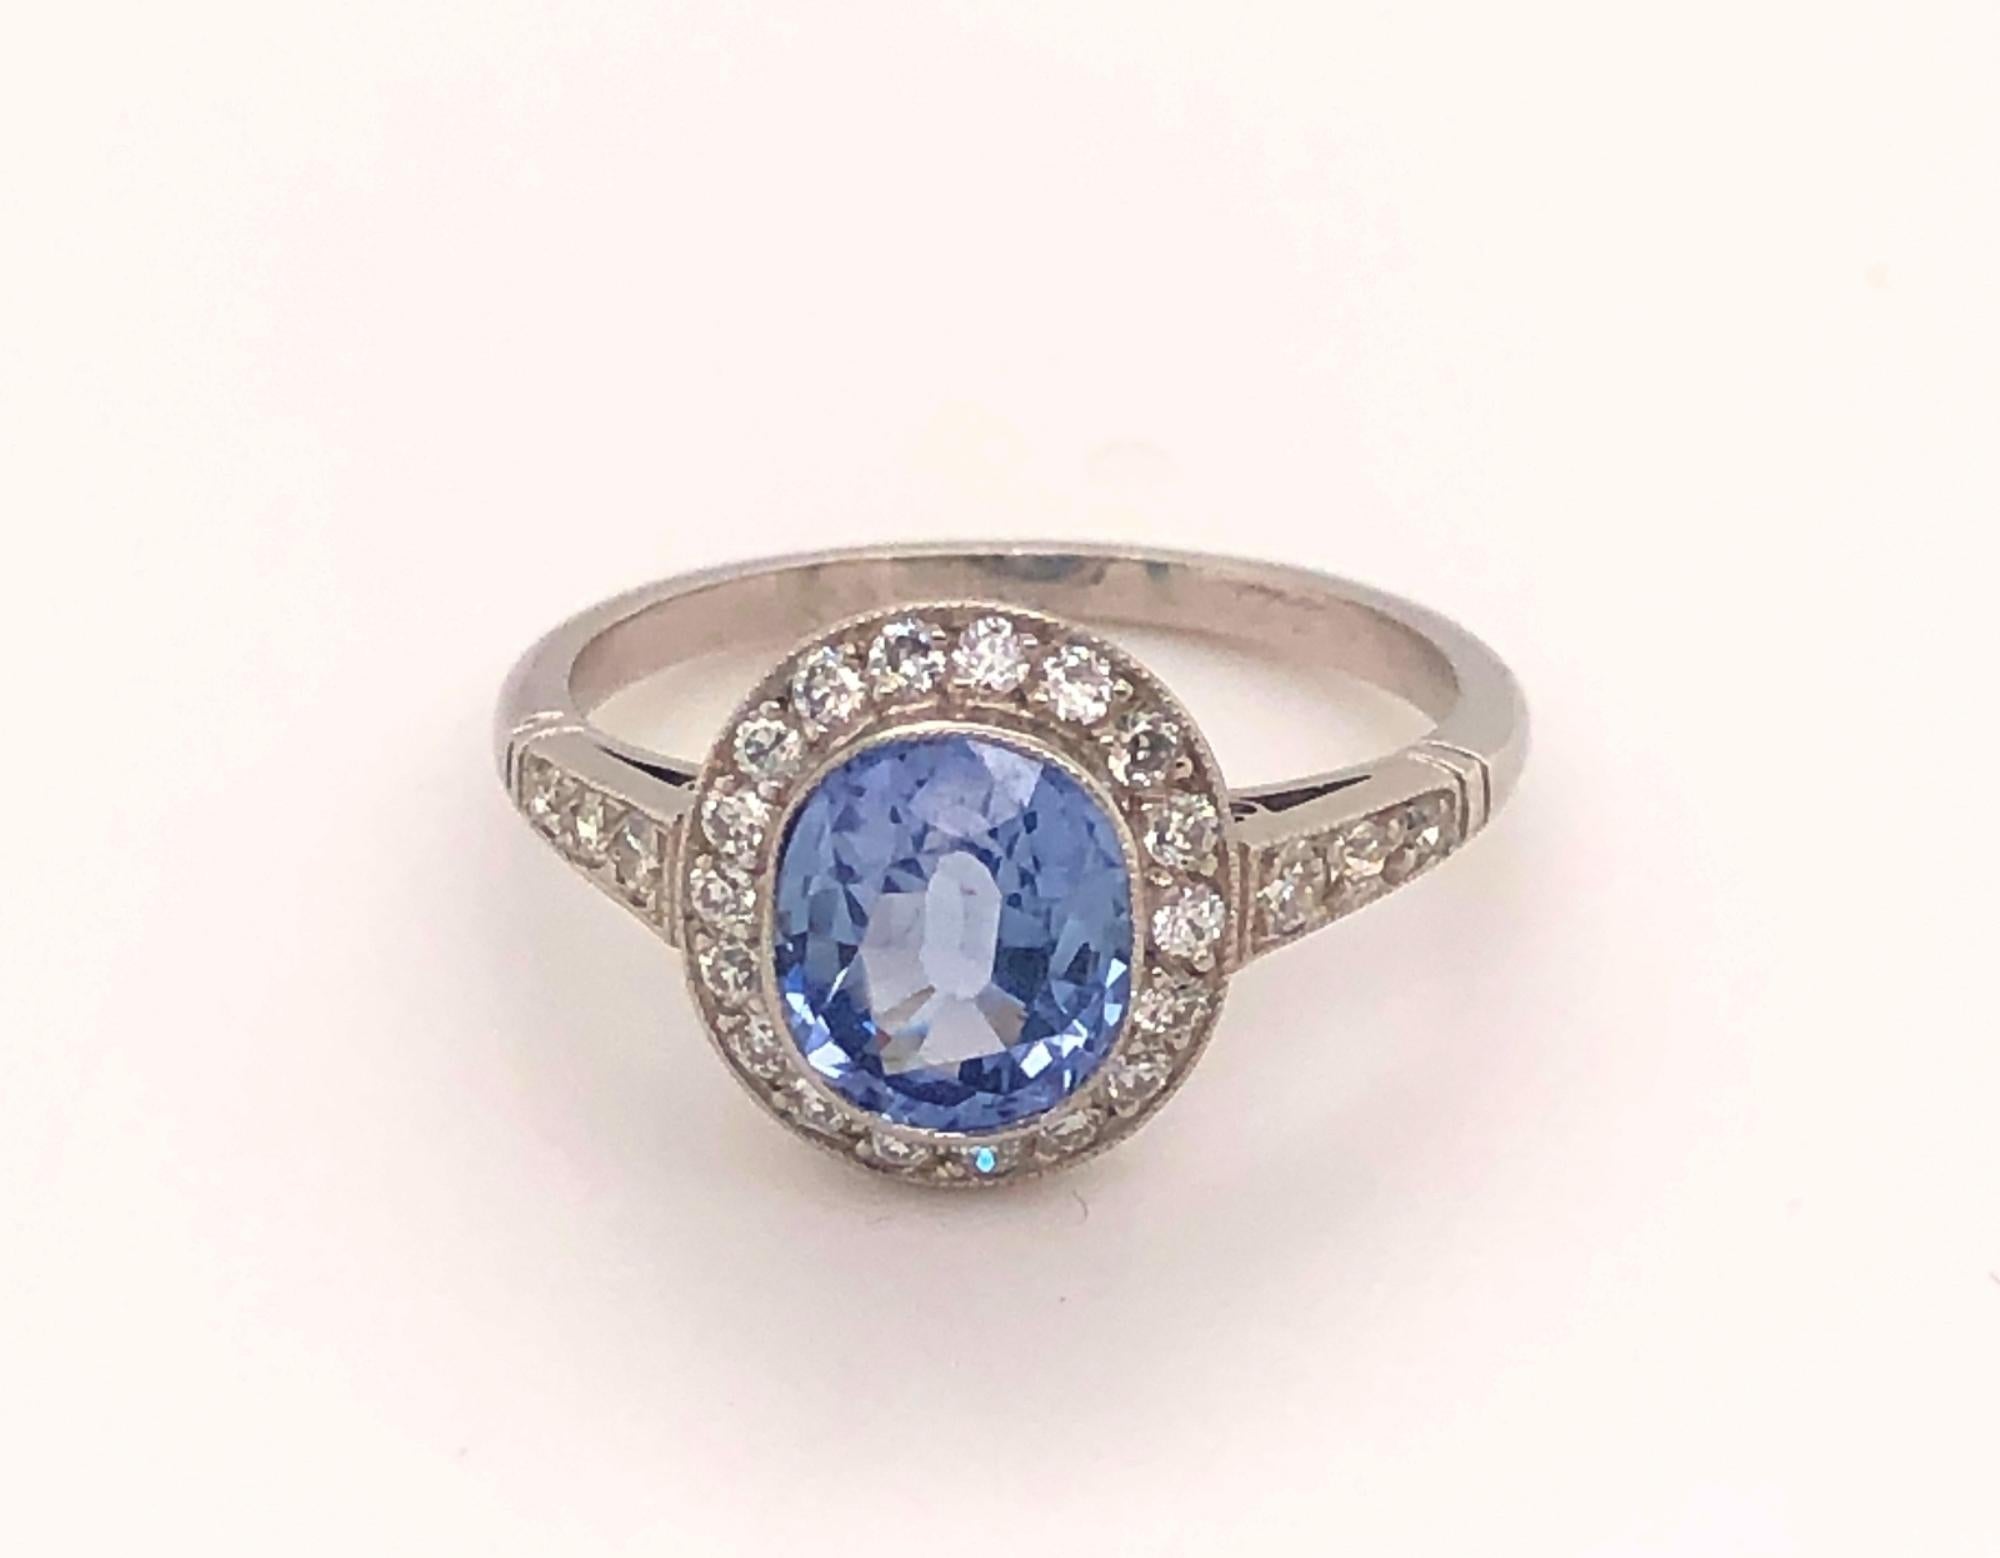 Vintage 1.86 Ceylon Sapphire Diamonds Platinum Halo Ring. This is a beautiful vintage platinum ring set with a natural gem quality 1.86 Ceylon sapphire. The sapphire is oval cut faceted with amazing light blue color. There are 18 diamonds around the